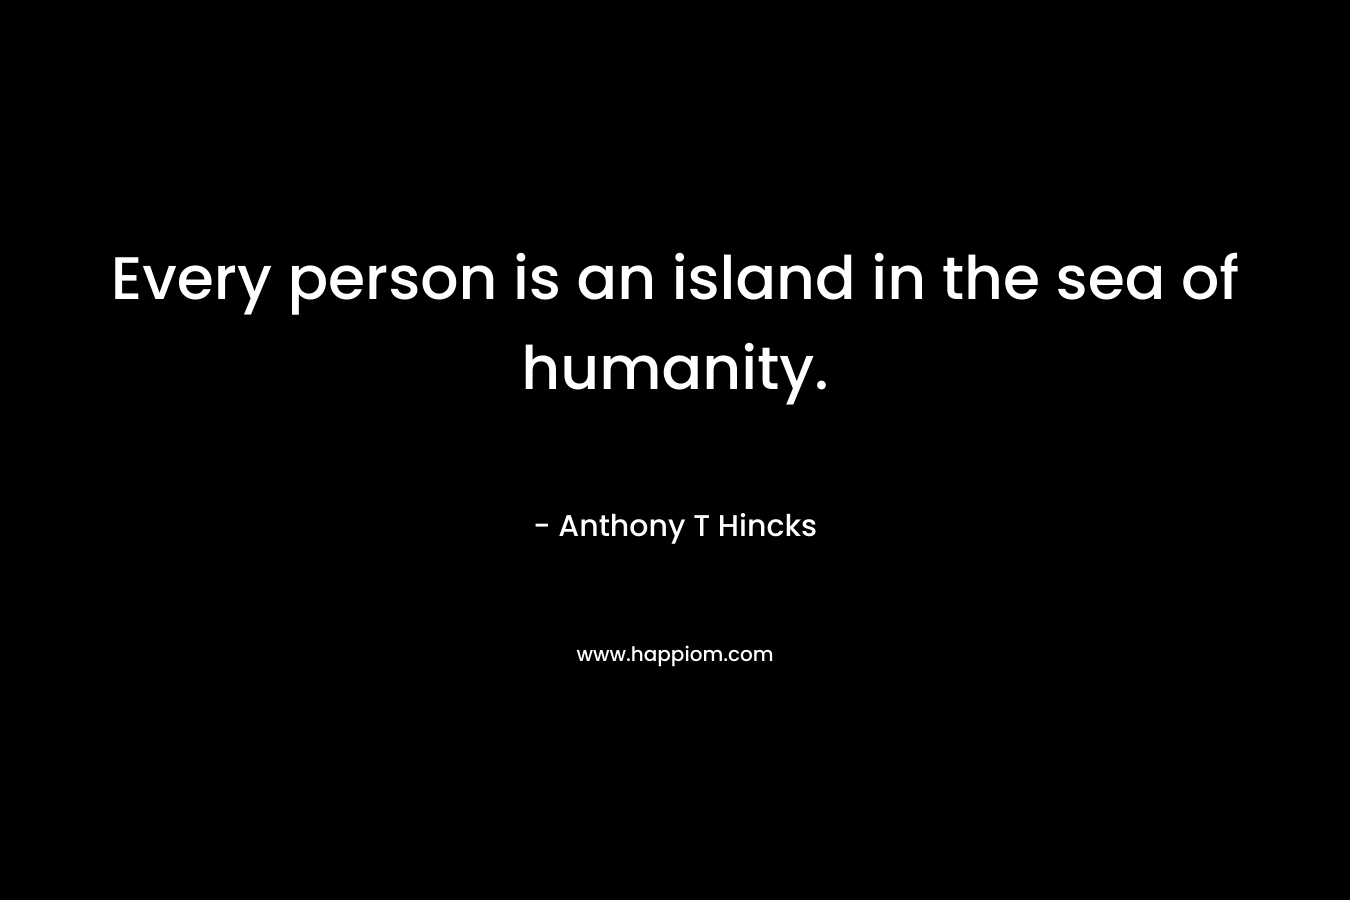 Every person is an island in the sea of humanity.